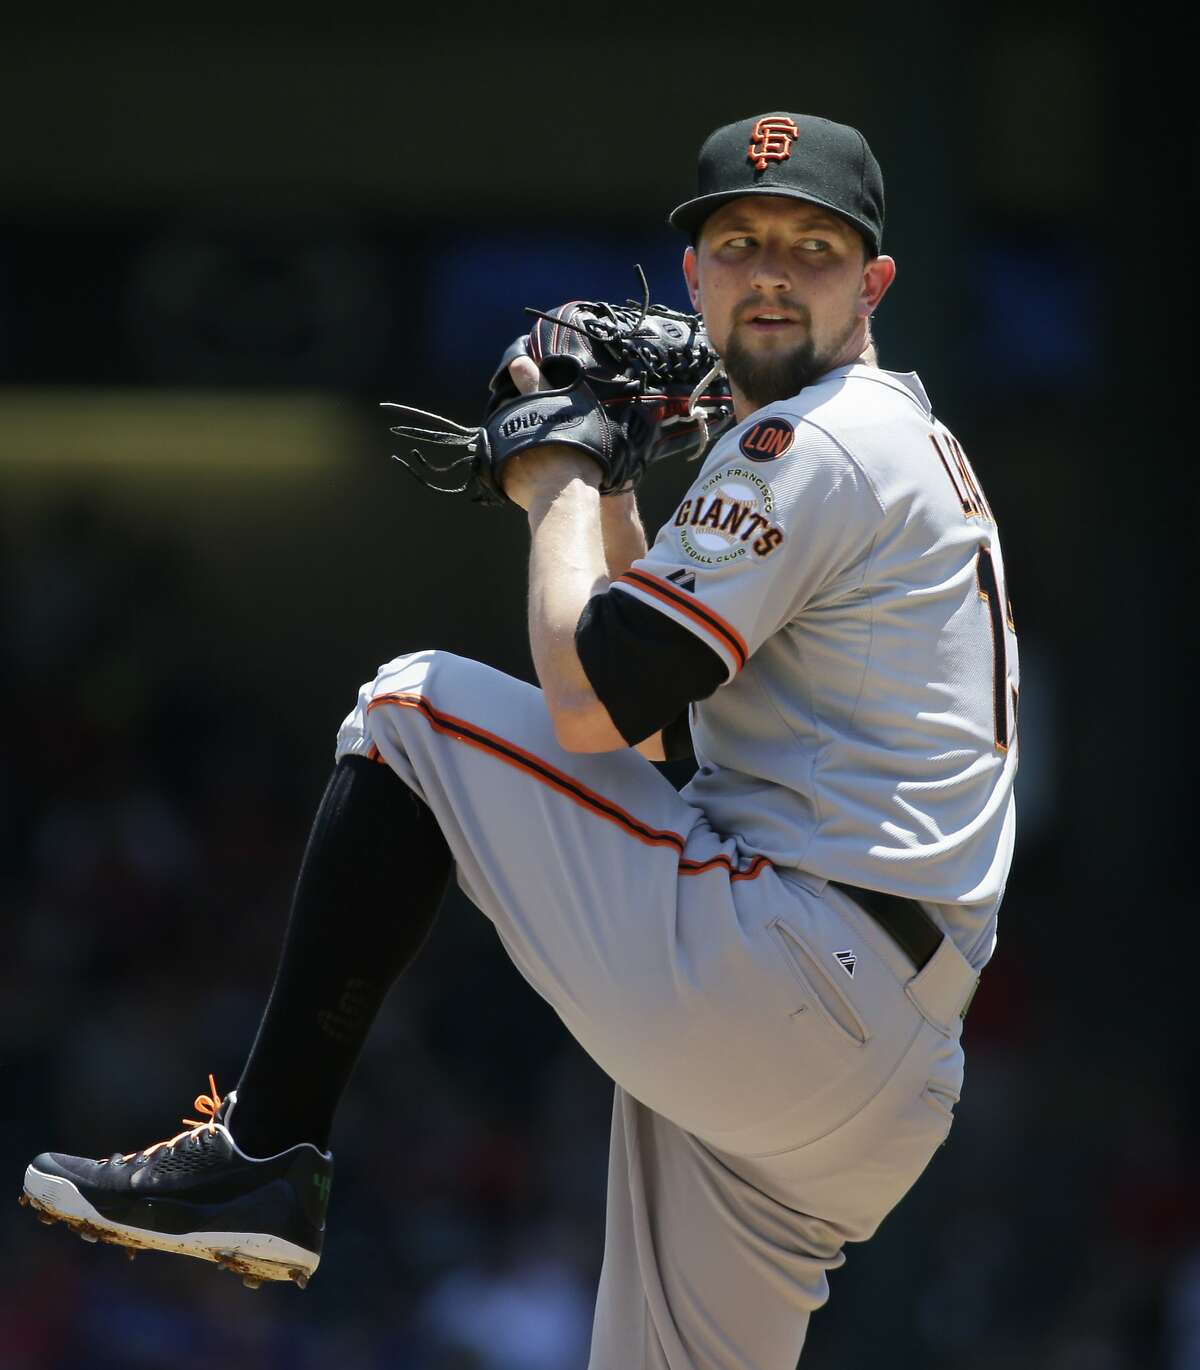 San Francisco Giants starting pitcher Mike Leake throws during the first inning of a baseball game against the Texas Rangers in Arlington, Texas, Sunday, Aug. 2, 2015. (AP Photo/LM Otero)